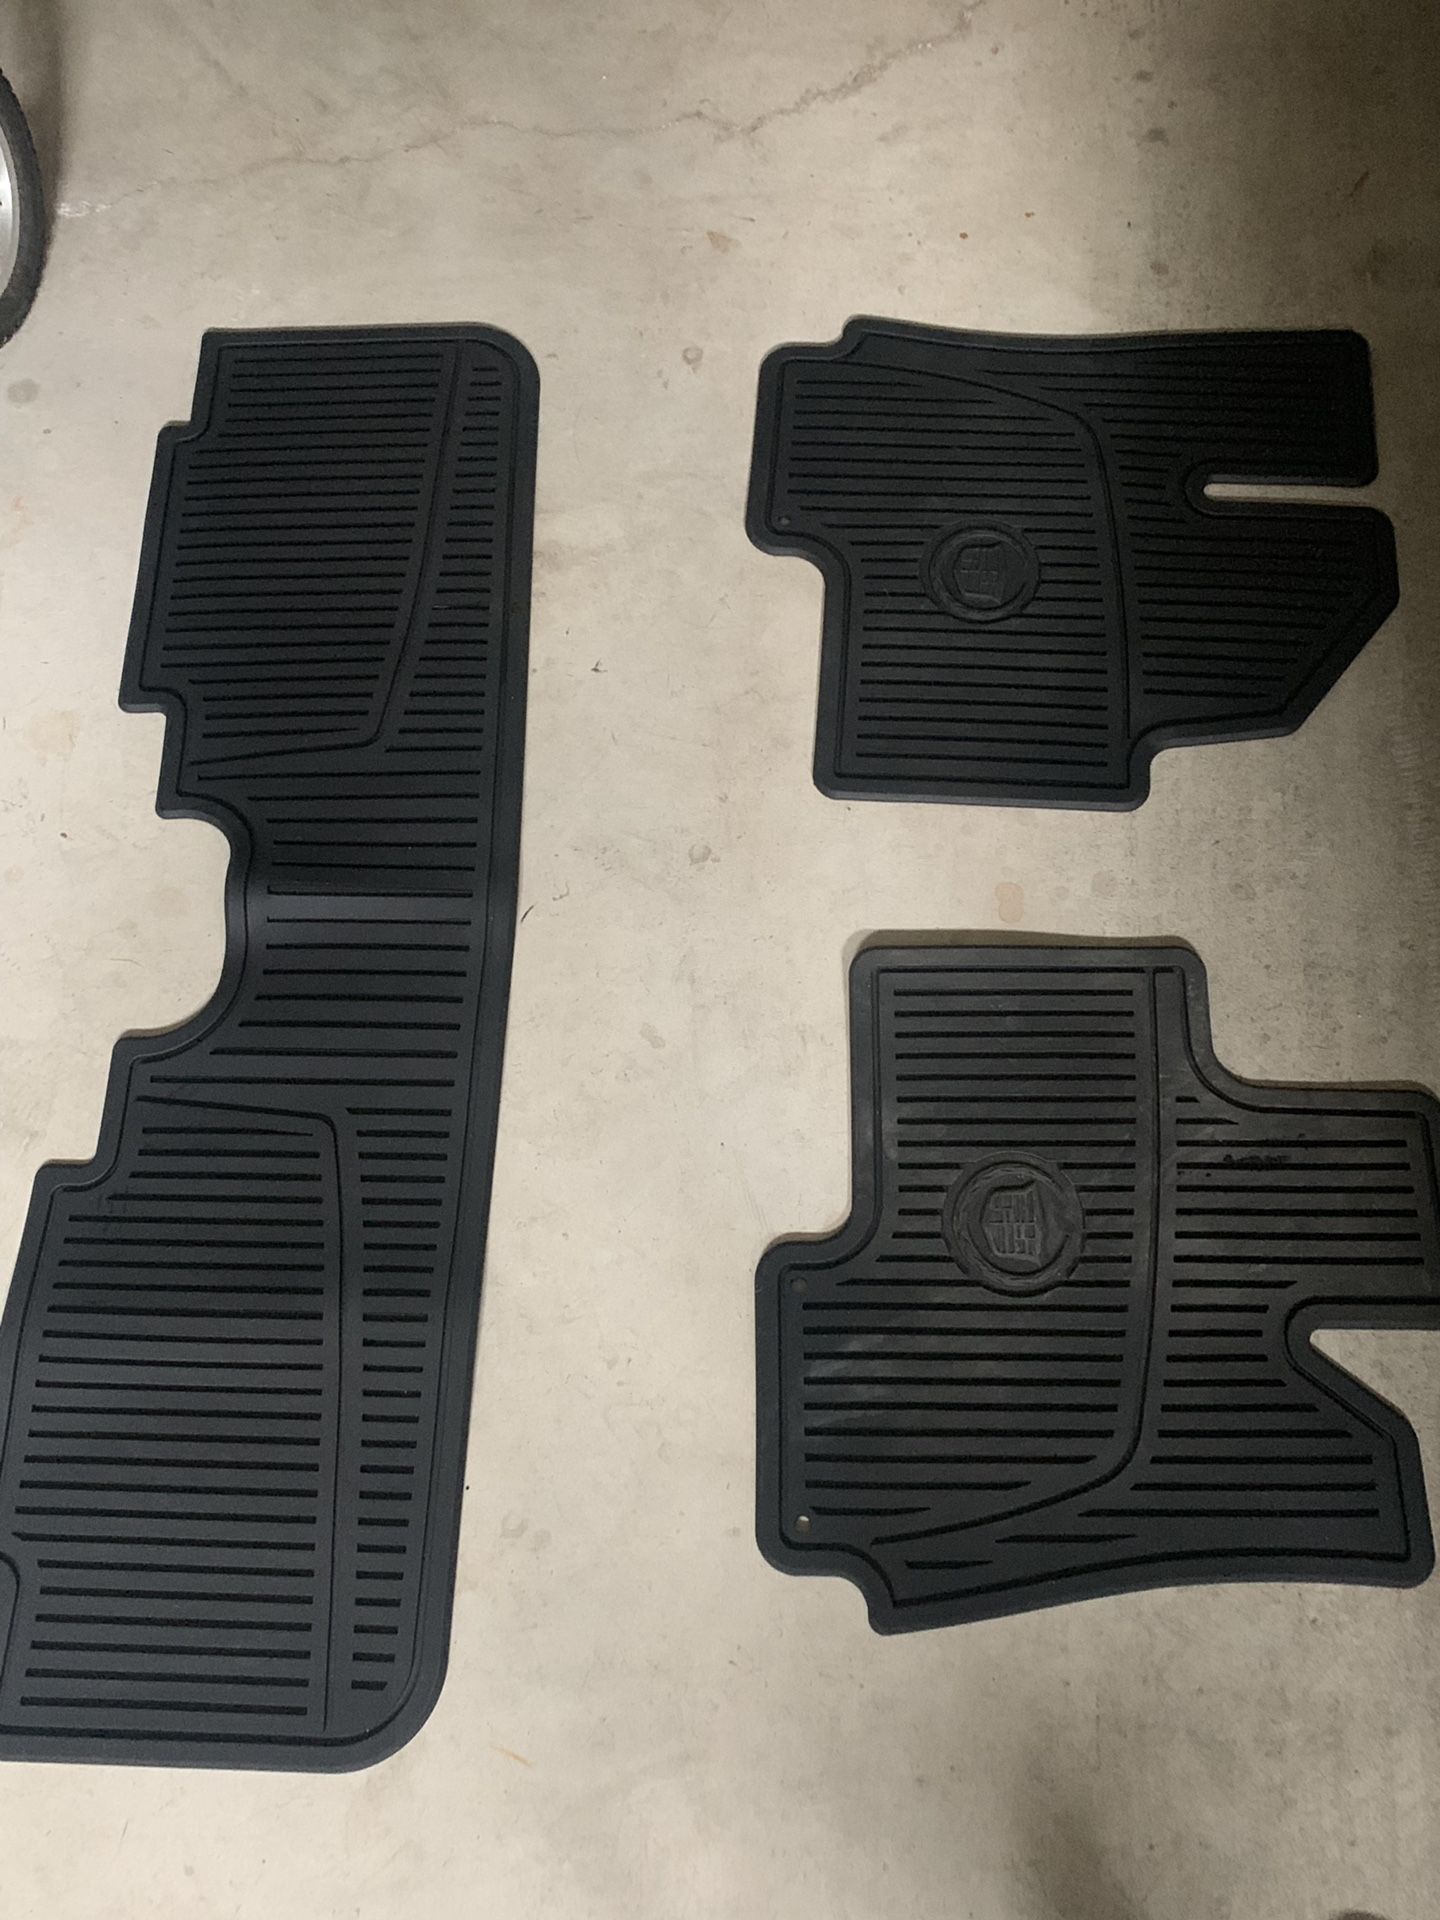 12-16 Cadillac SRX all weather mat pkg in like new shape